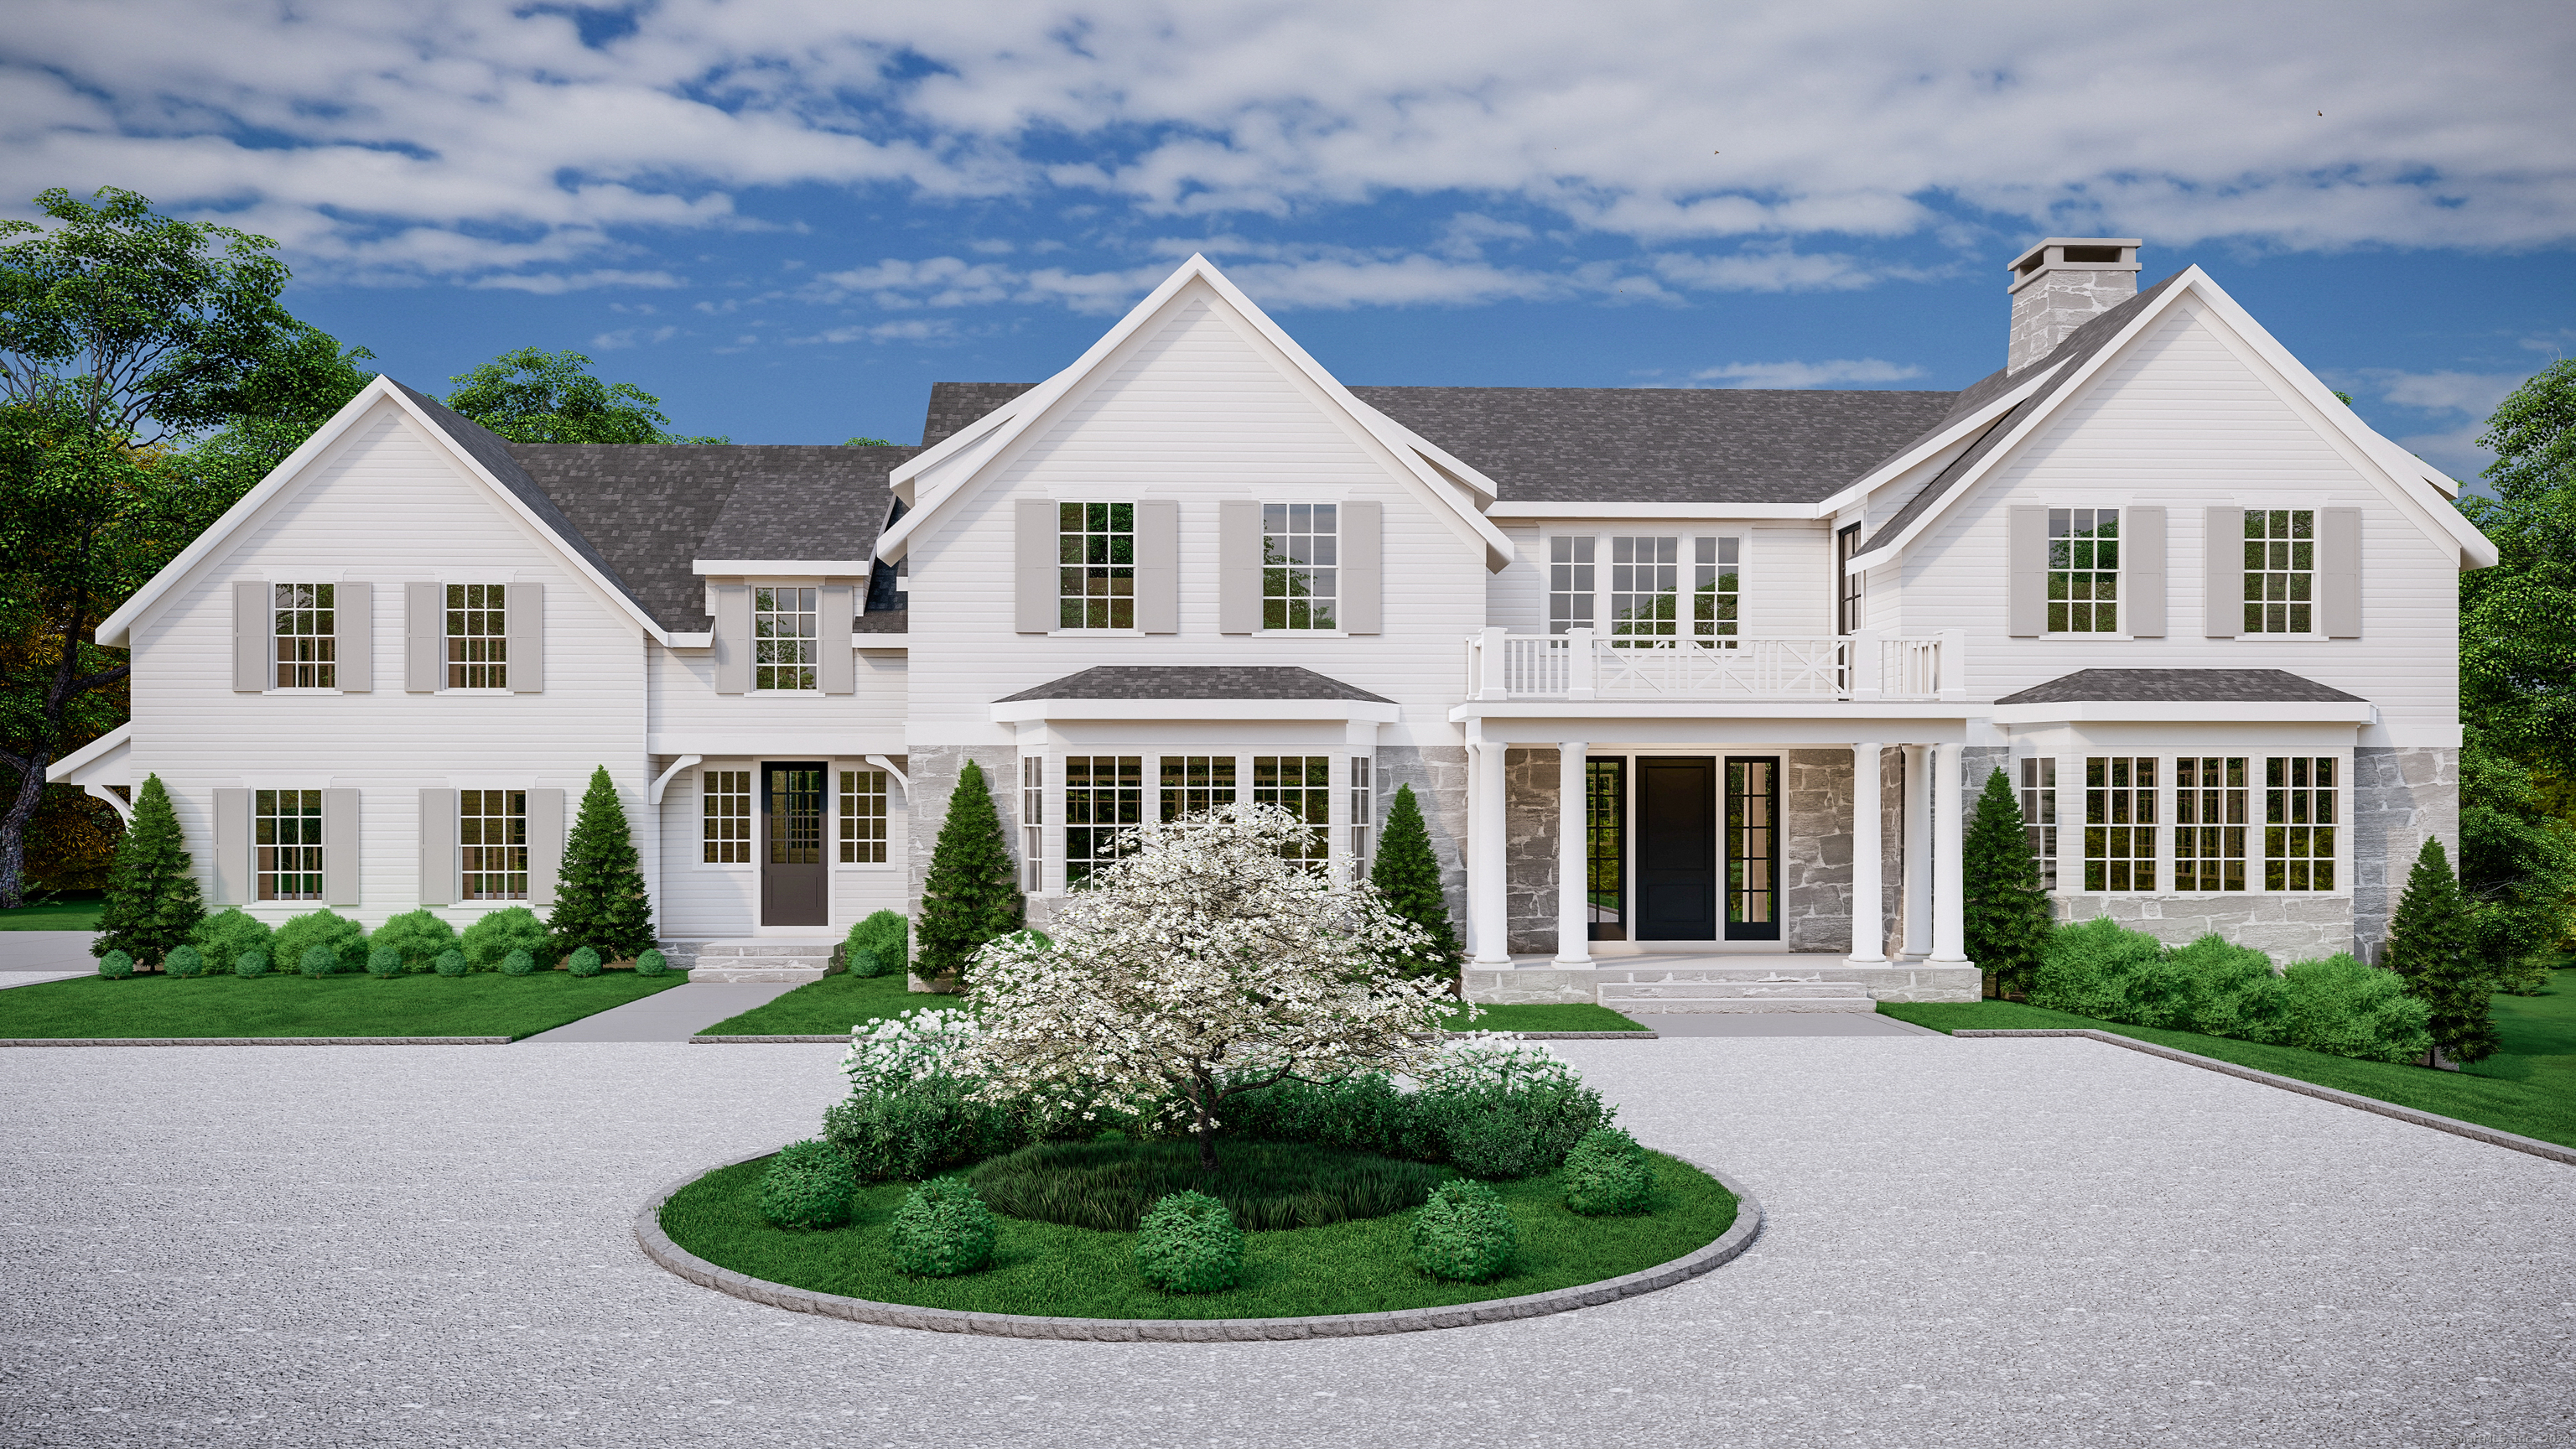 Property for Sale at 2 Charcoal Hill Common, Westport, Connecticut - Bedrooms: 6 
Bathrooms: 8 
Rooms: 17  - $5,699,000